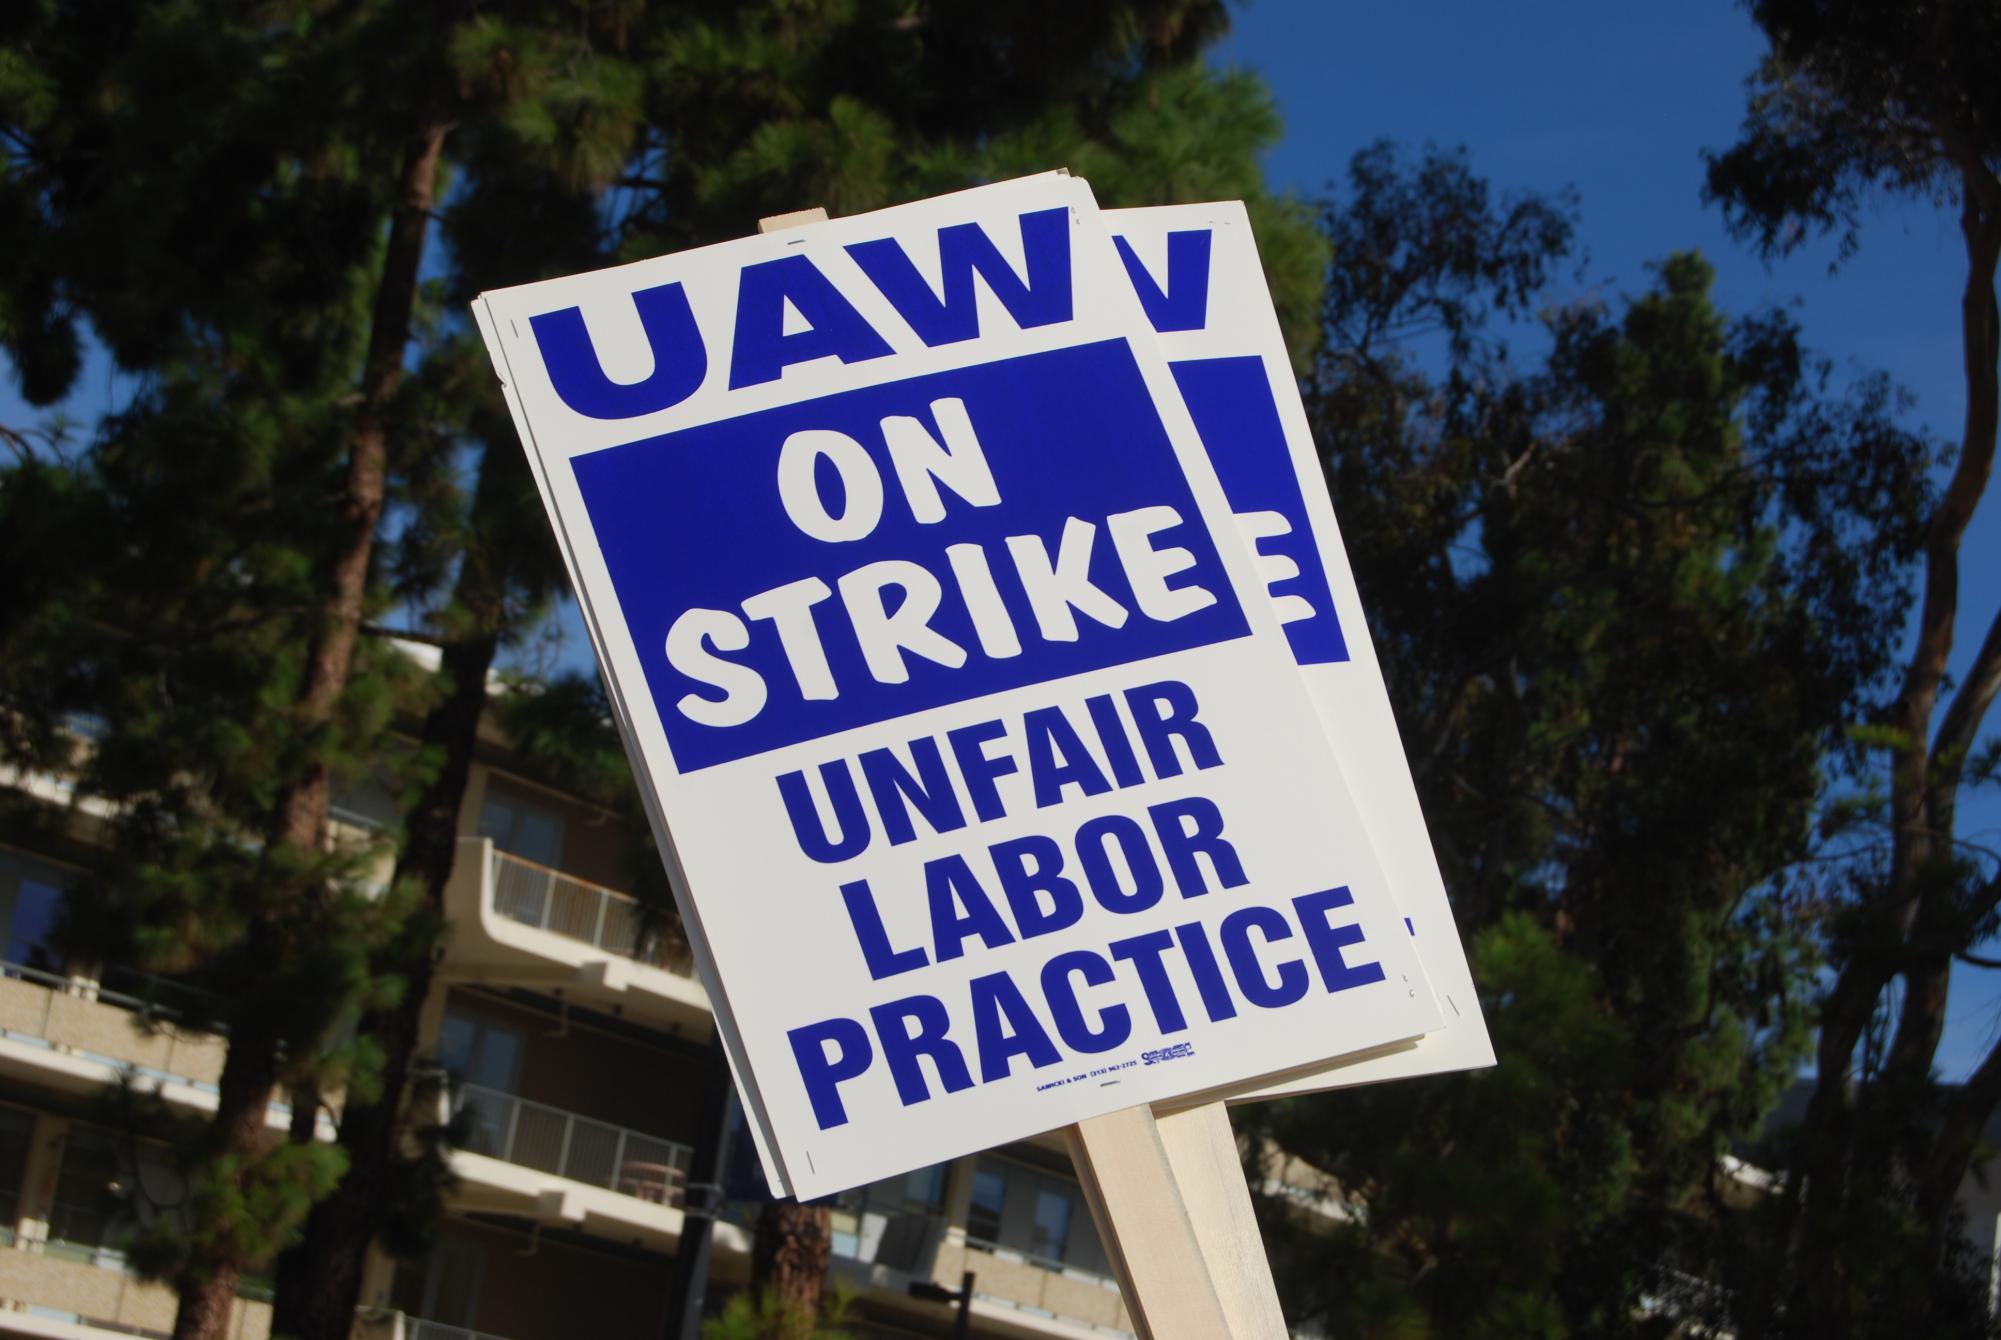 Public Employment Relations Board denies UC’s request to block UAW strike